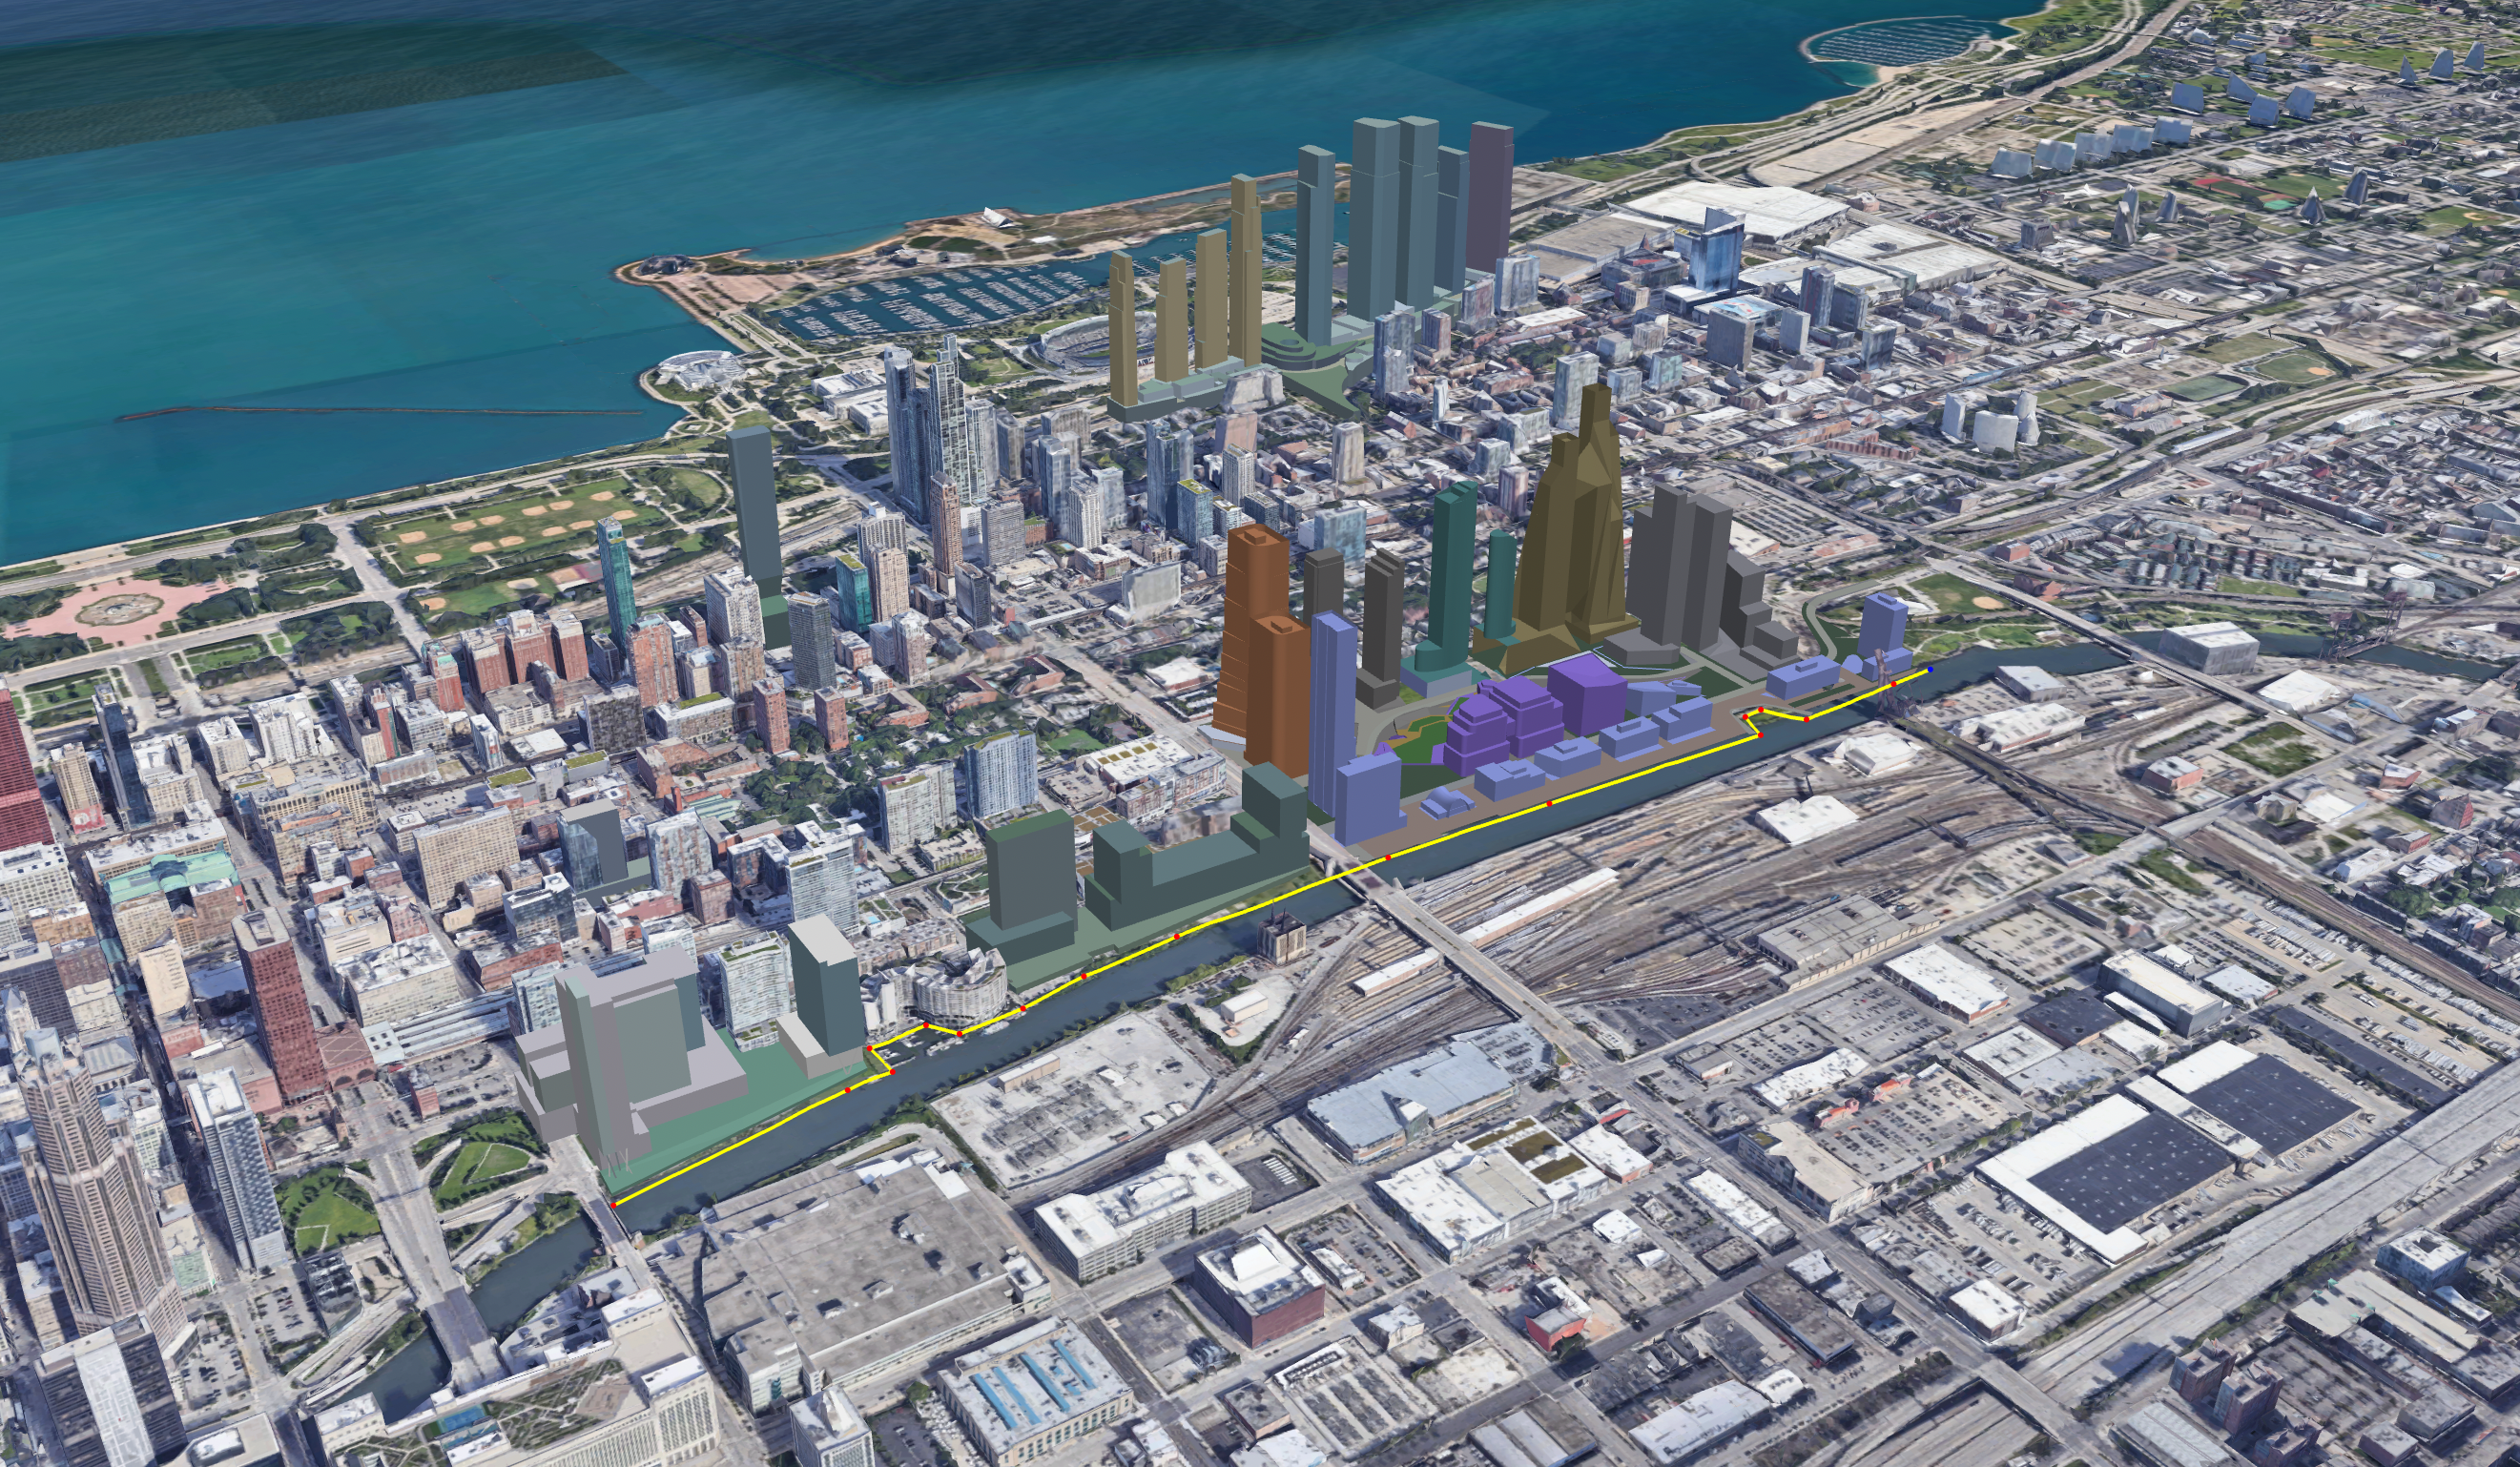 Planned South Loop developments. Southbank on left and envisioned Riverwalk connection highlighted in yellow